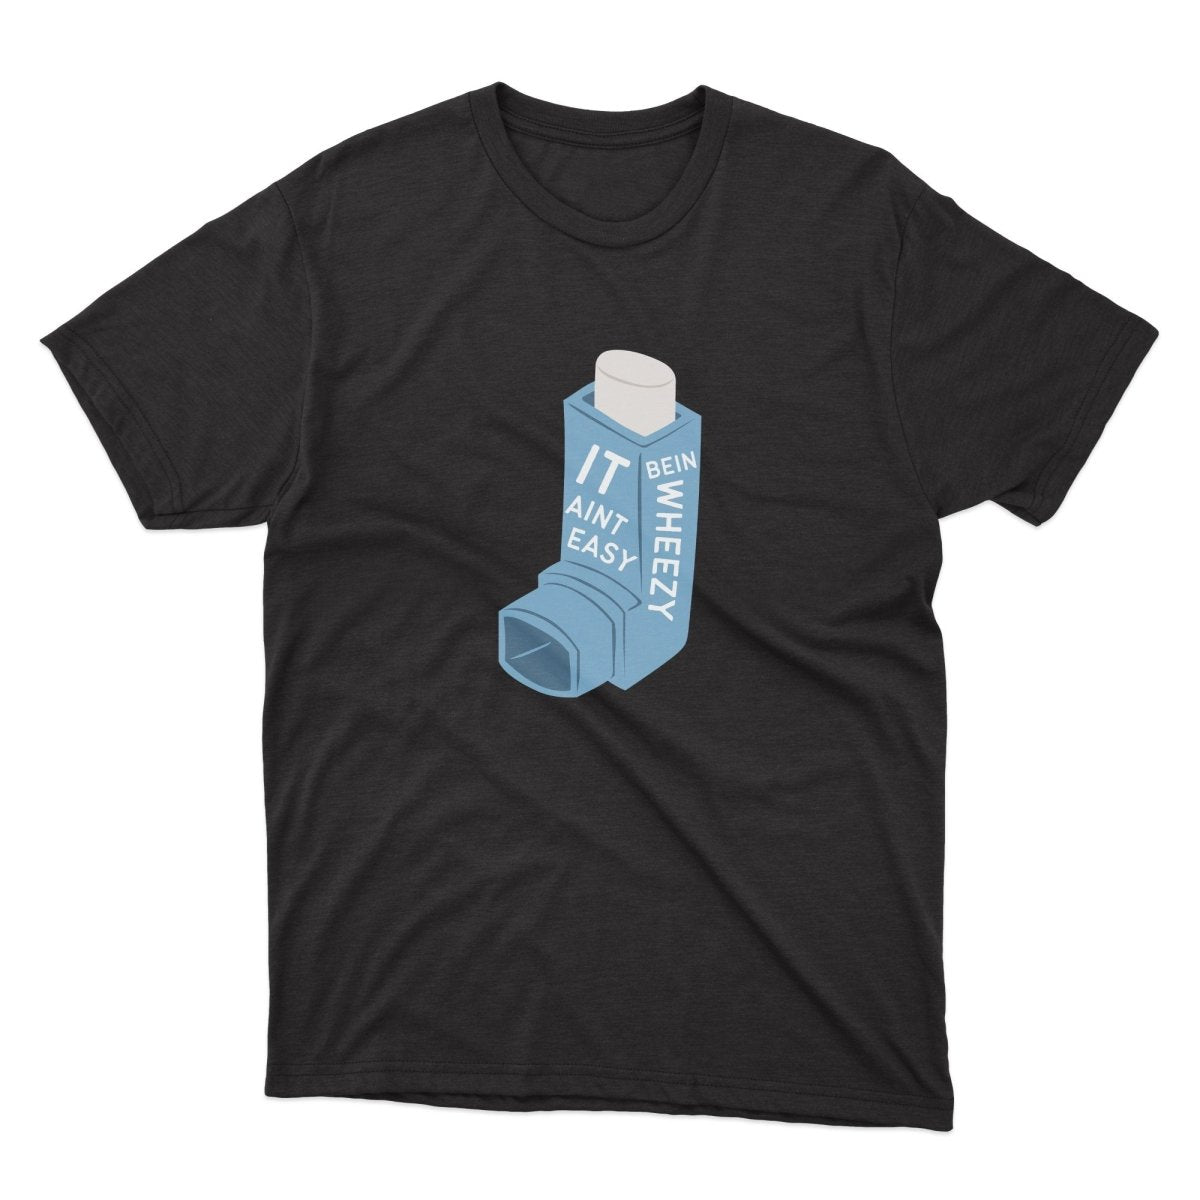 It Ain't Easy Being Wheezy Shirt - stickerbullIt Ain't Easy Being Wheezy ShirtShirtsPrintifystickerbull16590889589910878176BlackSa black t - shirt with a blue tube of water on it